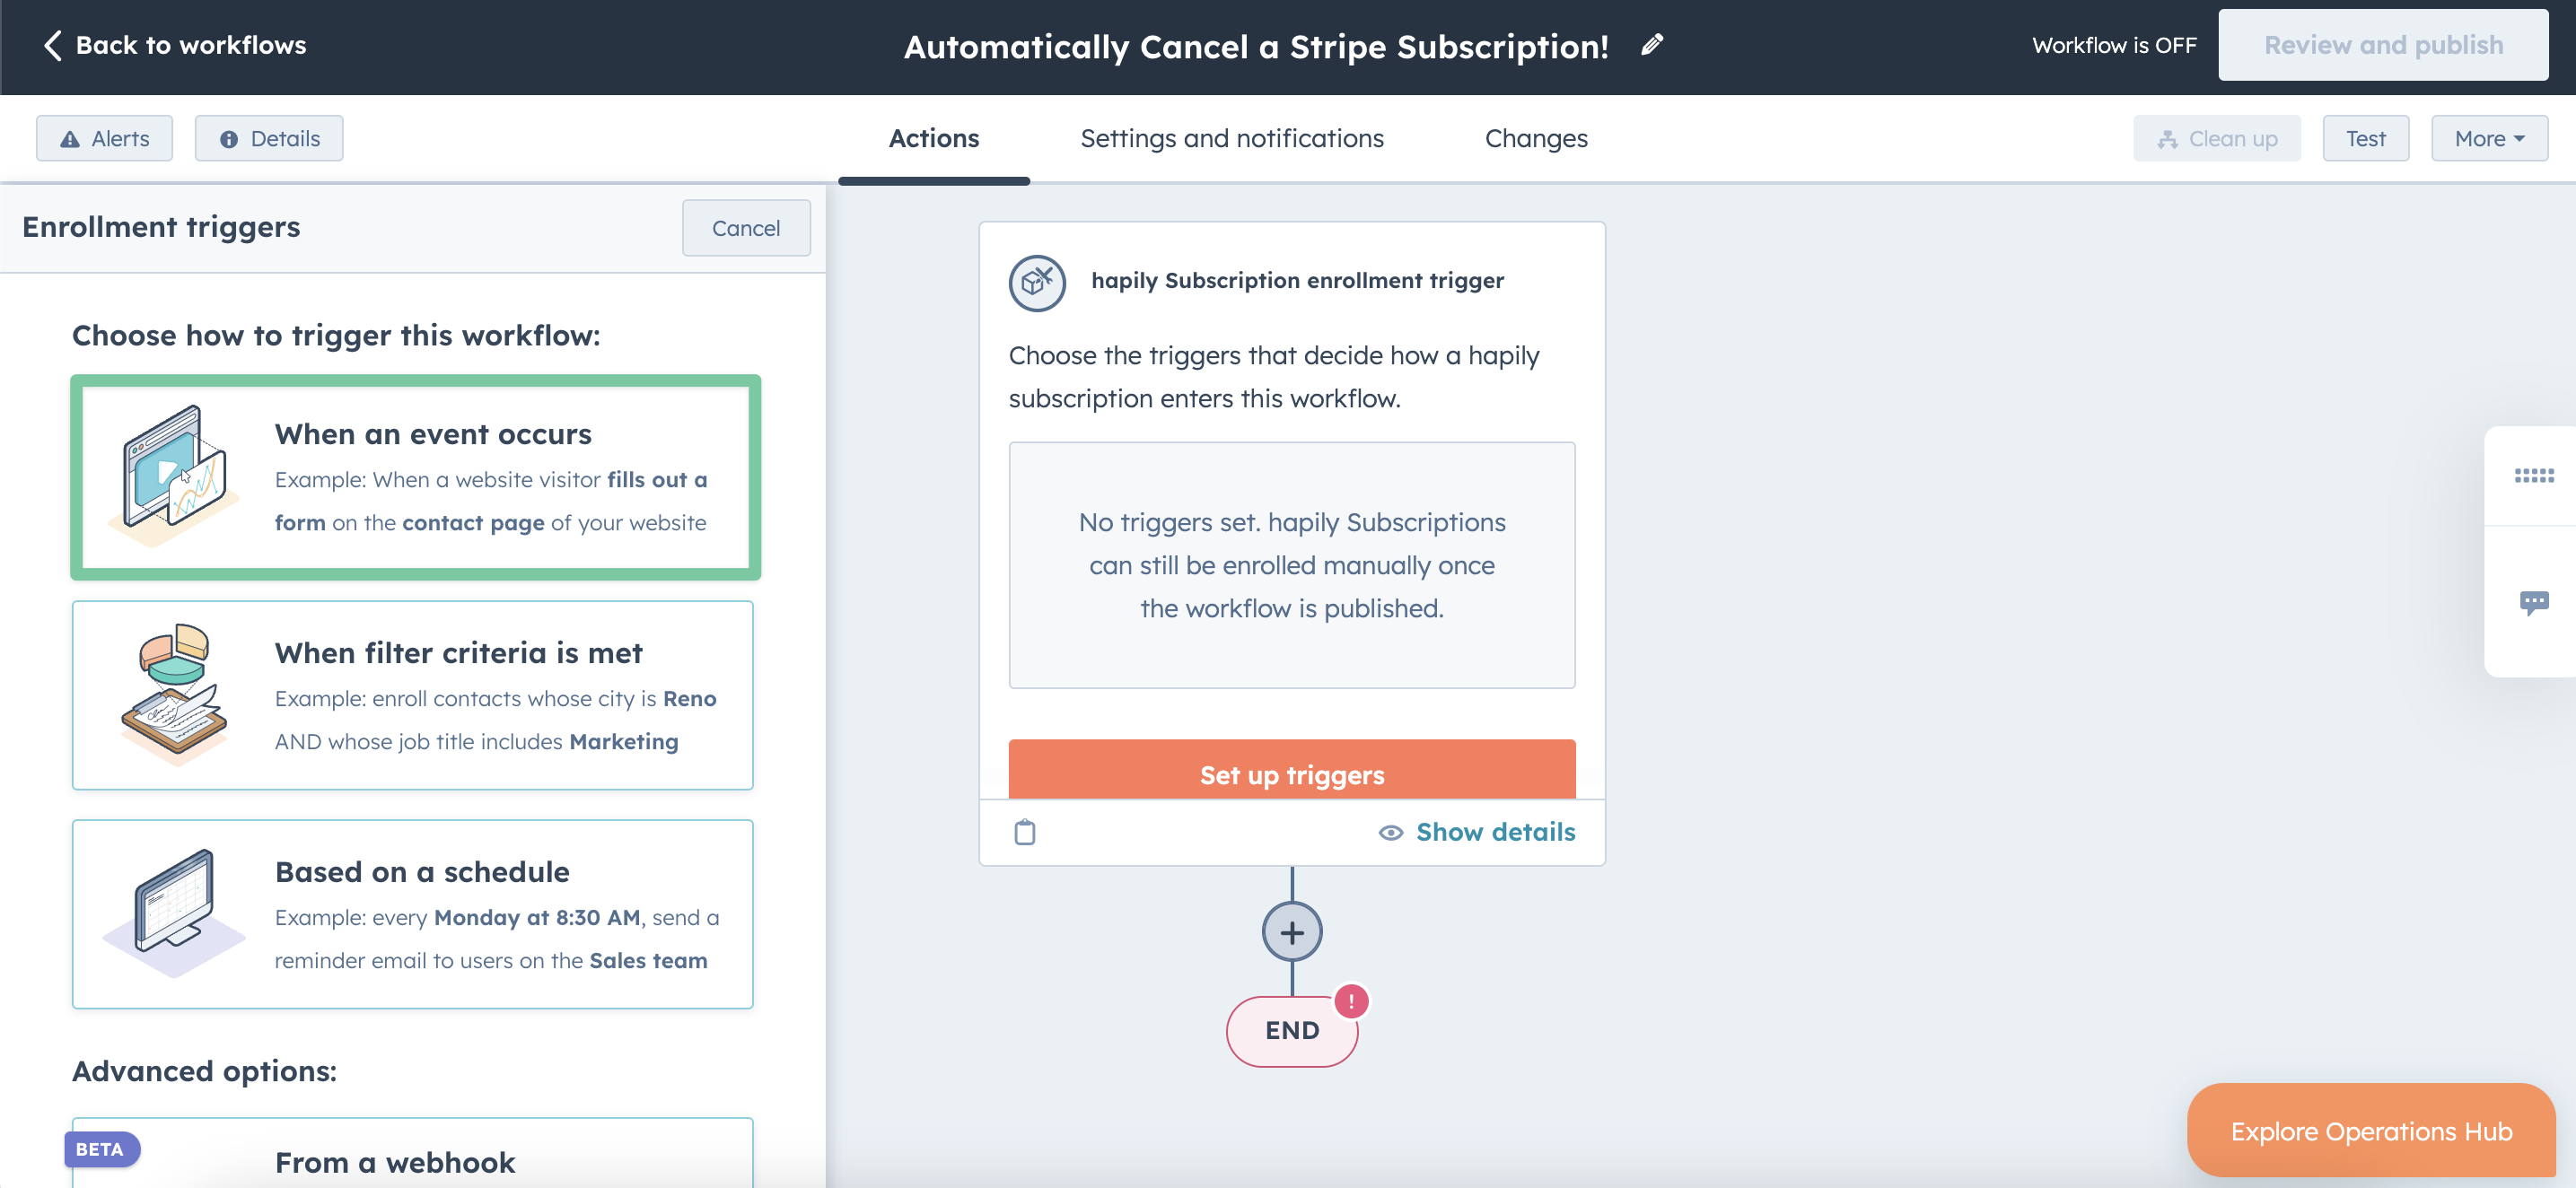 How to cancel a Stripe subscription using HubSpot workflows